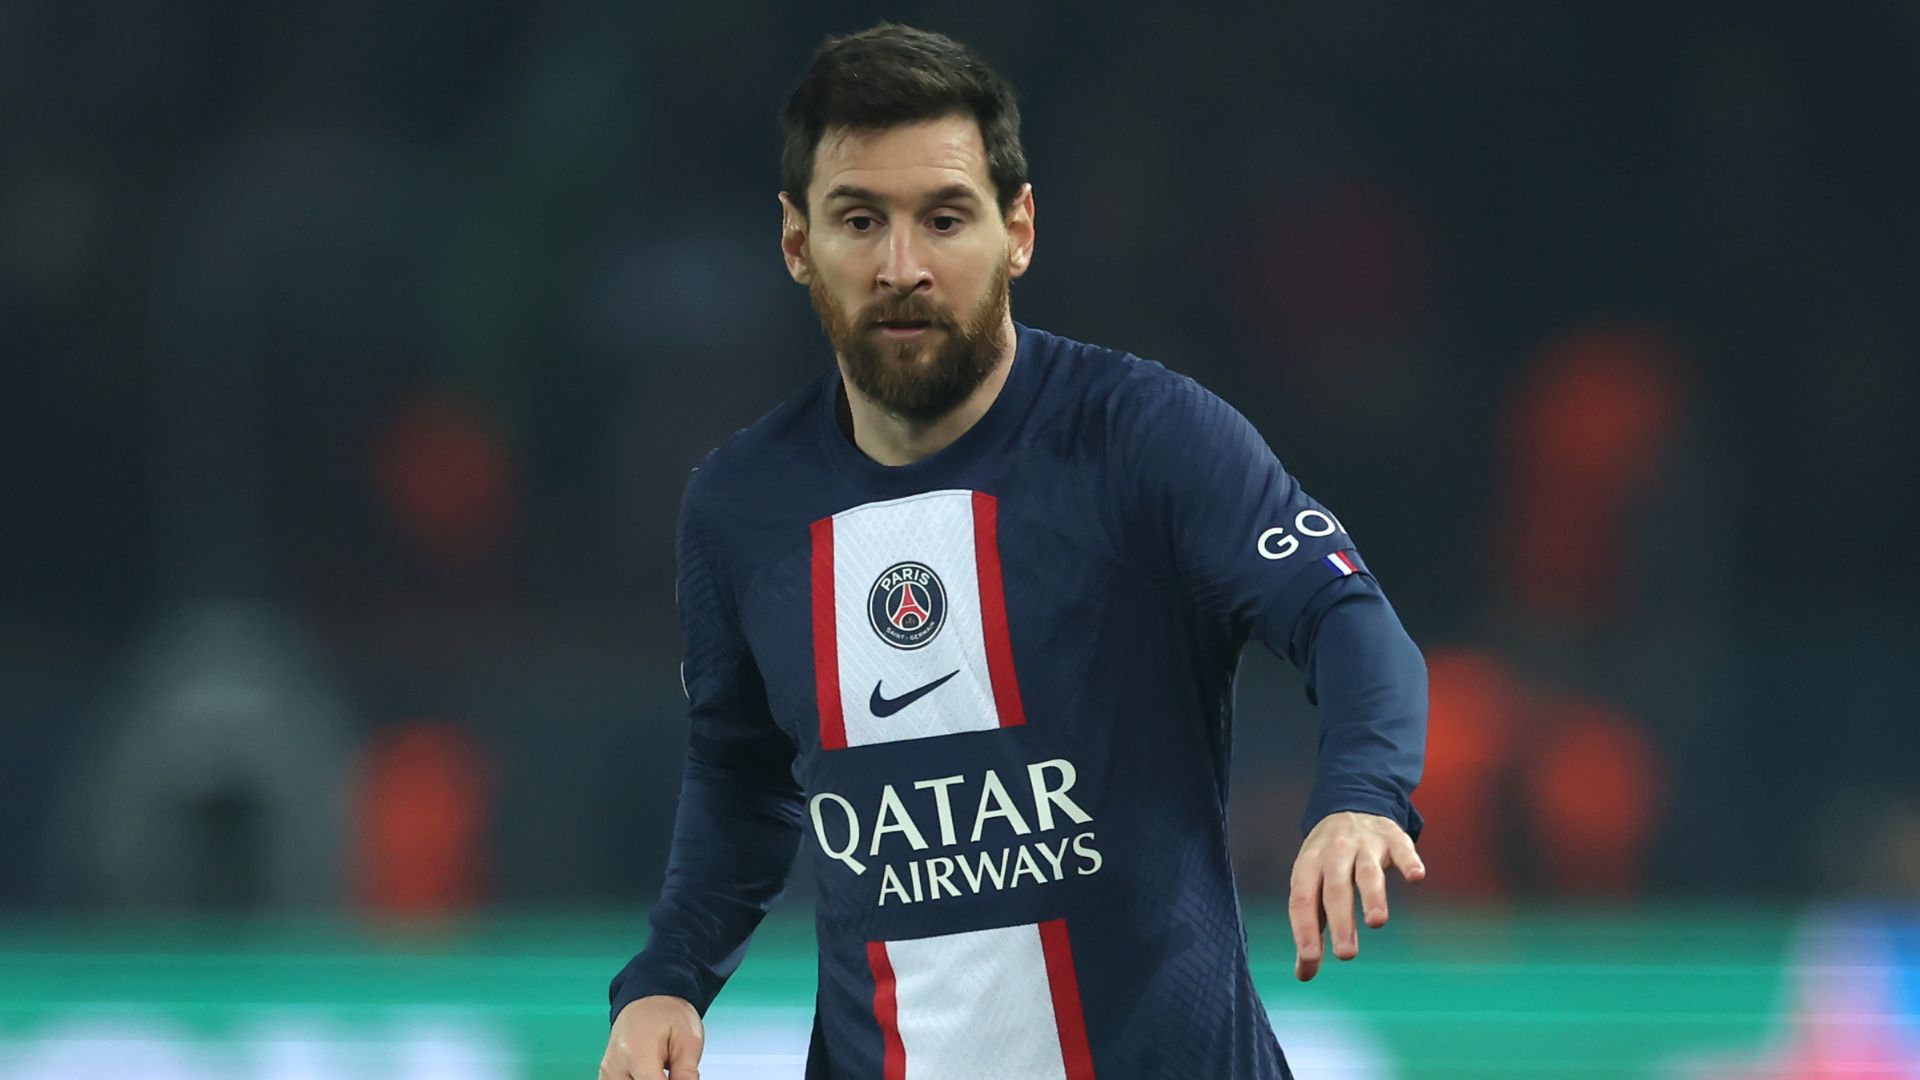 Messi on the pitch for PSG